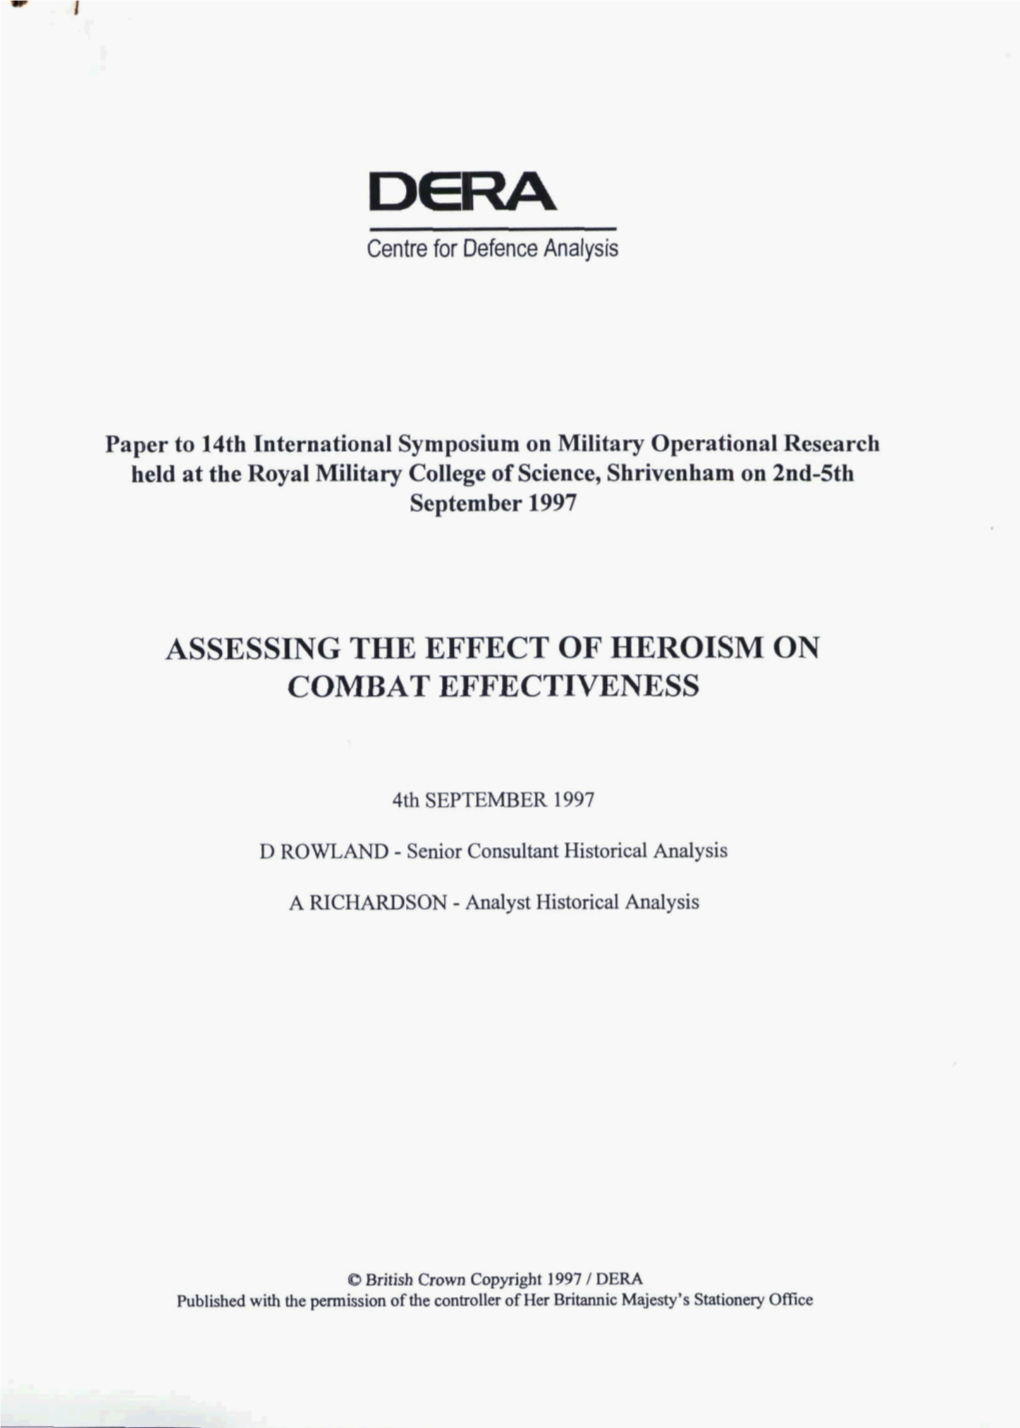 Assessing the Effect of Heroism on Combat Effectiveness